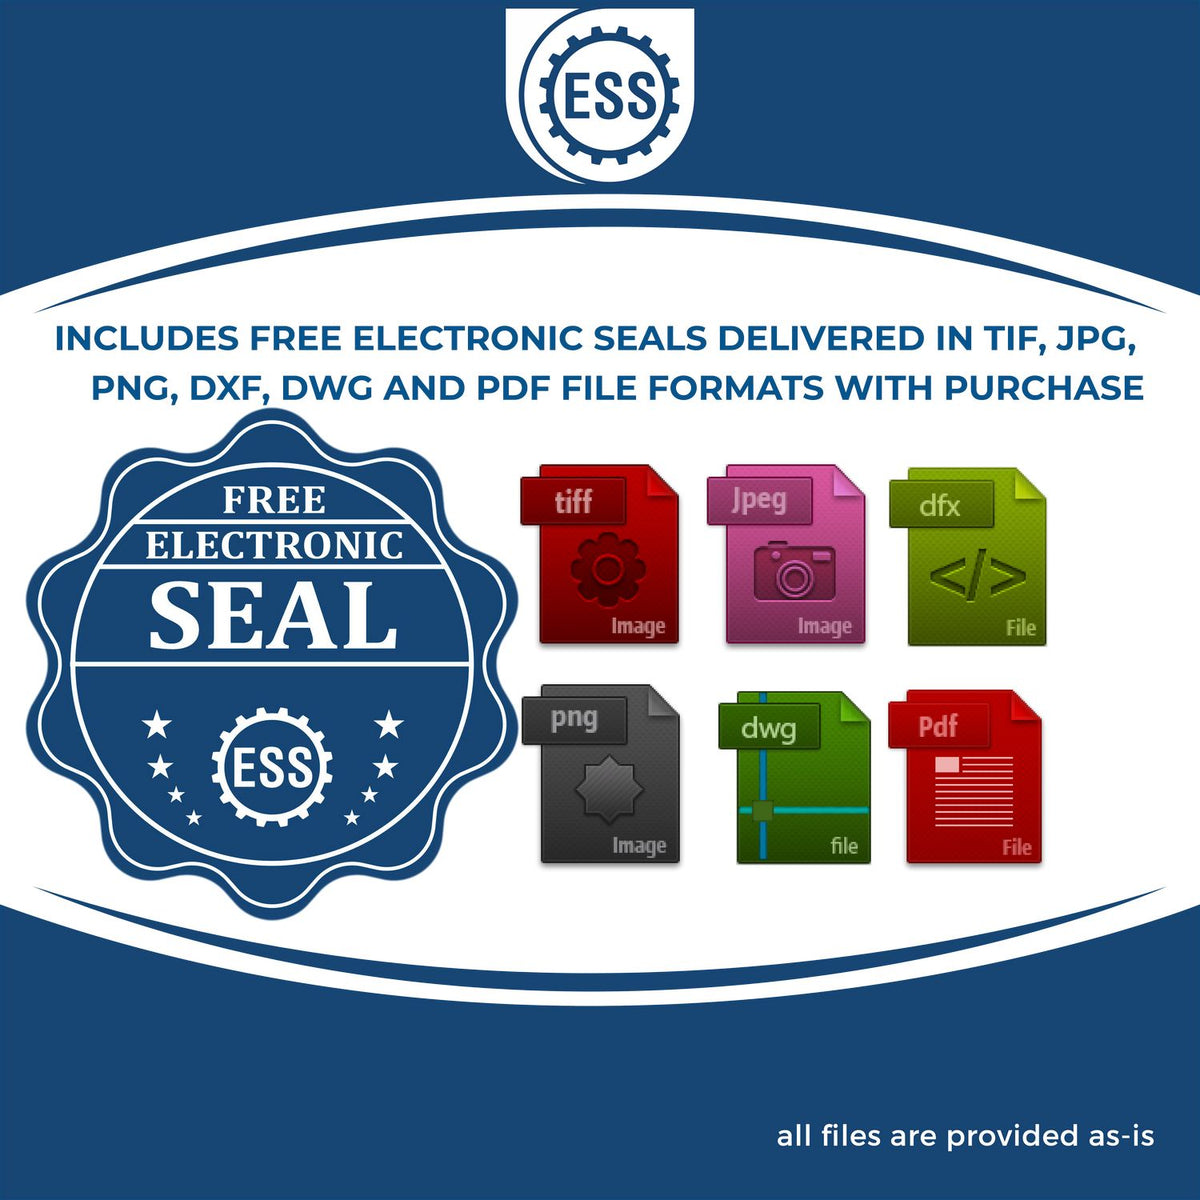 An infographic for the free electronic seal for the Self-Inking Montana Geologist Stamp illustrating the different file type icons such as DXF, DWG, TIF, JPG and PNG.